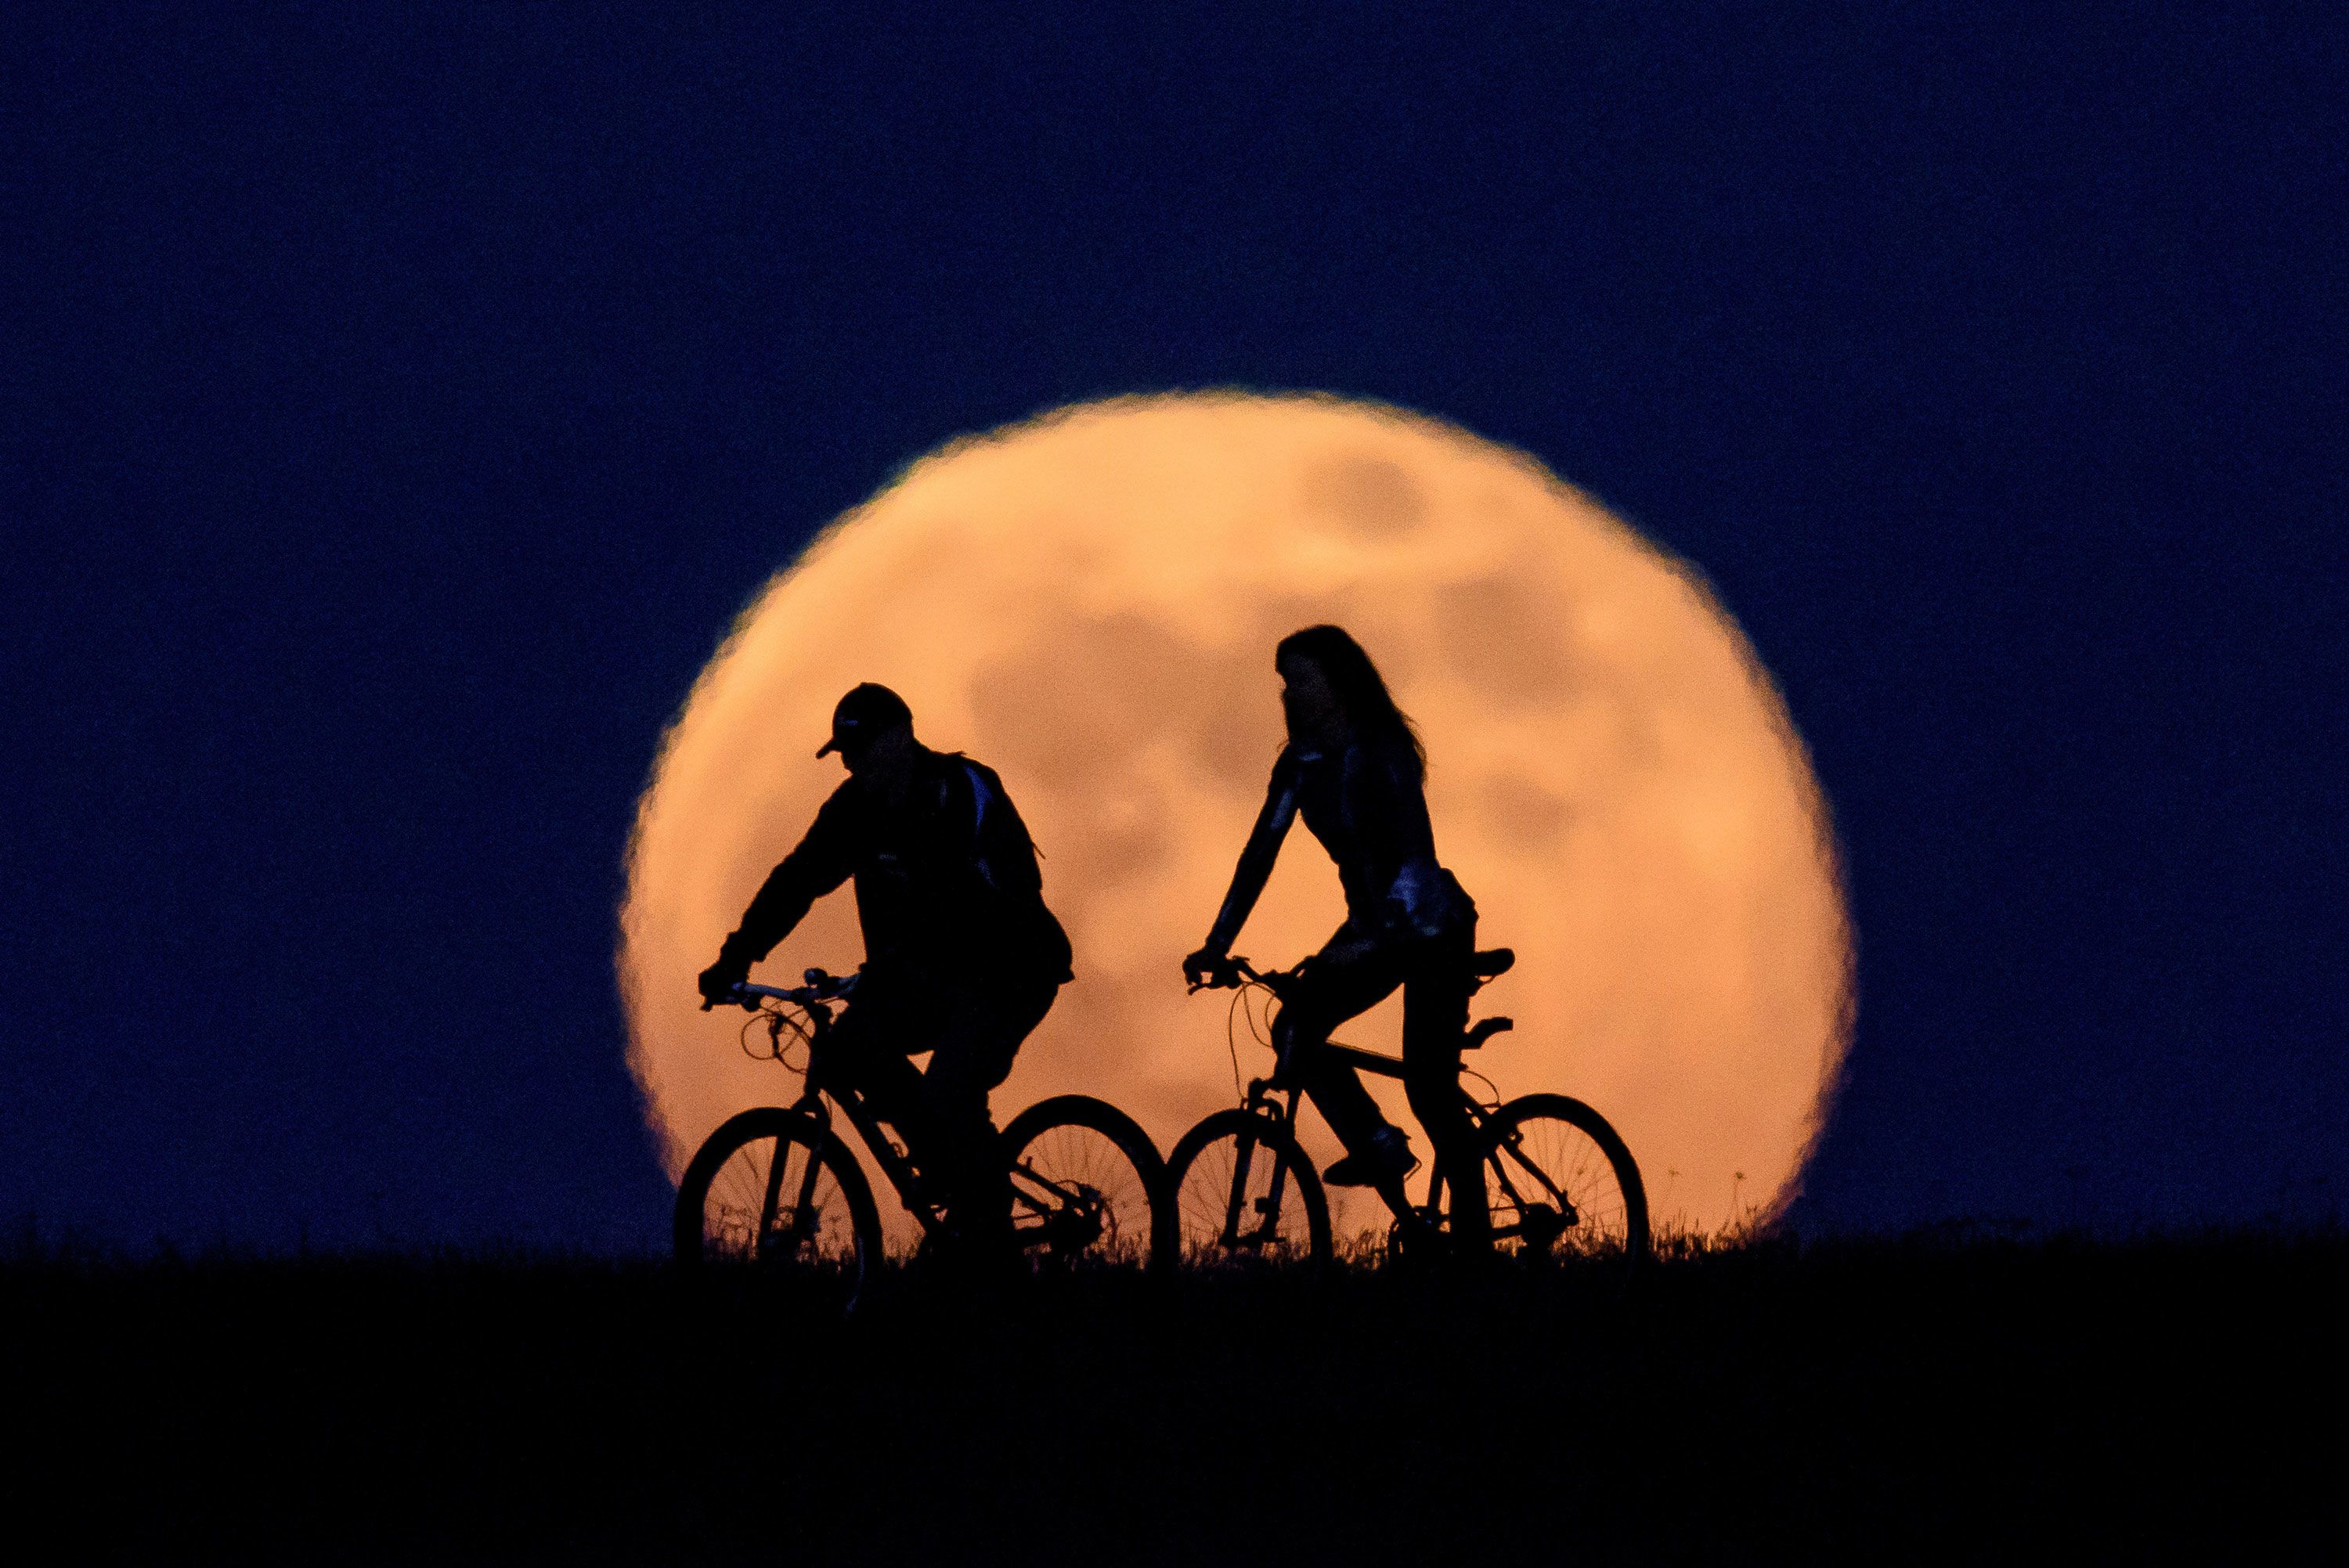 A full moon rises above two cyclists near Salgotarjan, Hungary, on Thursday, May 7.